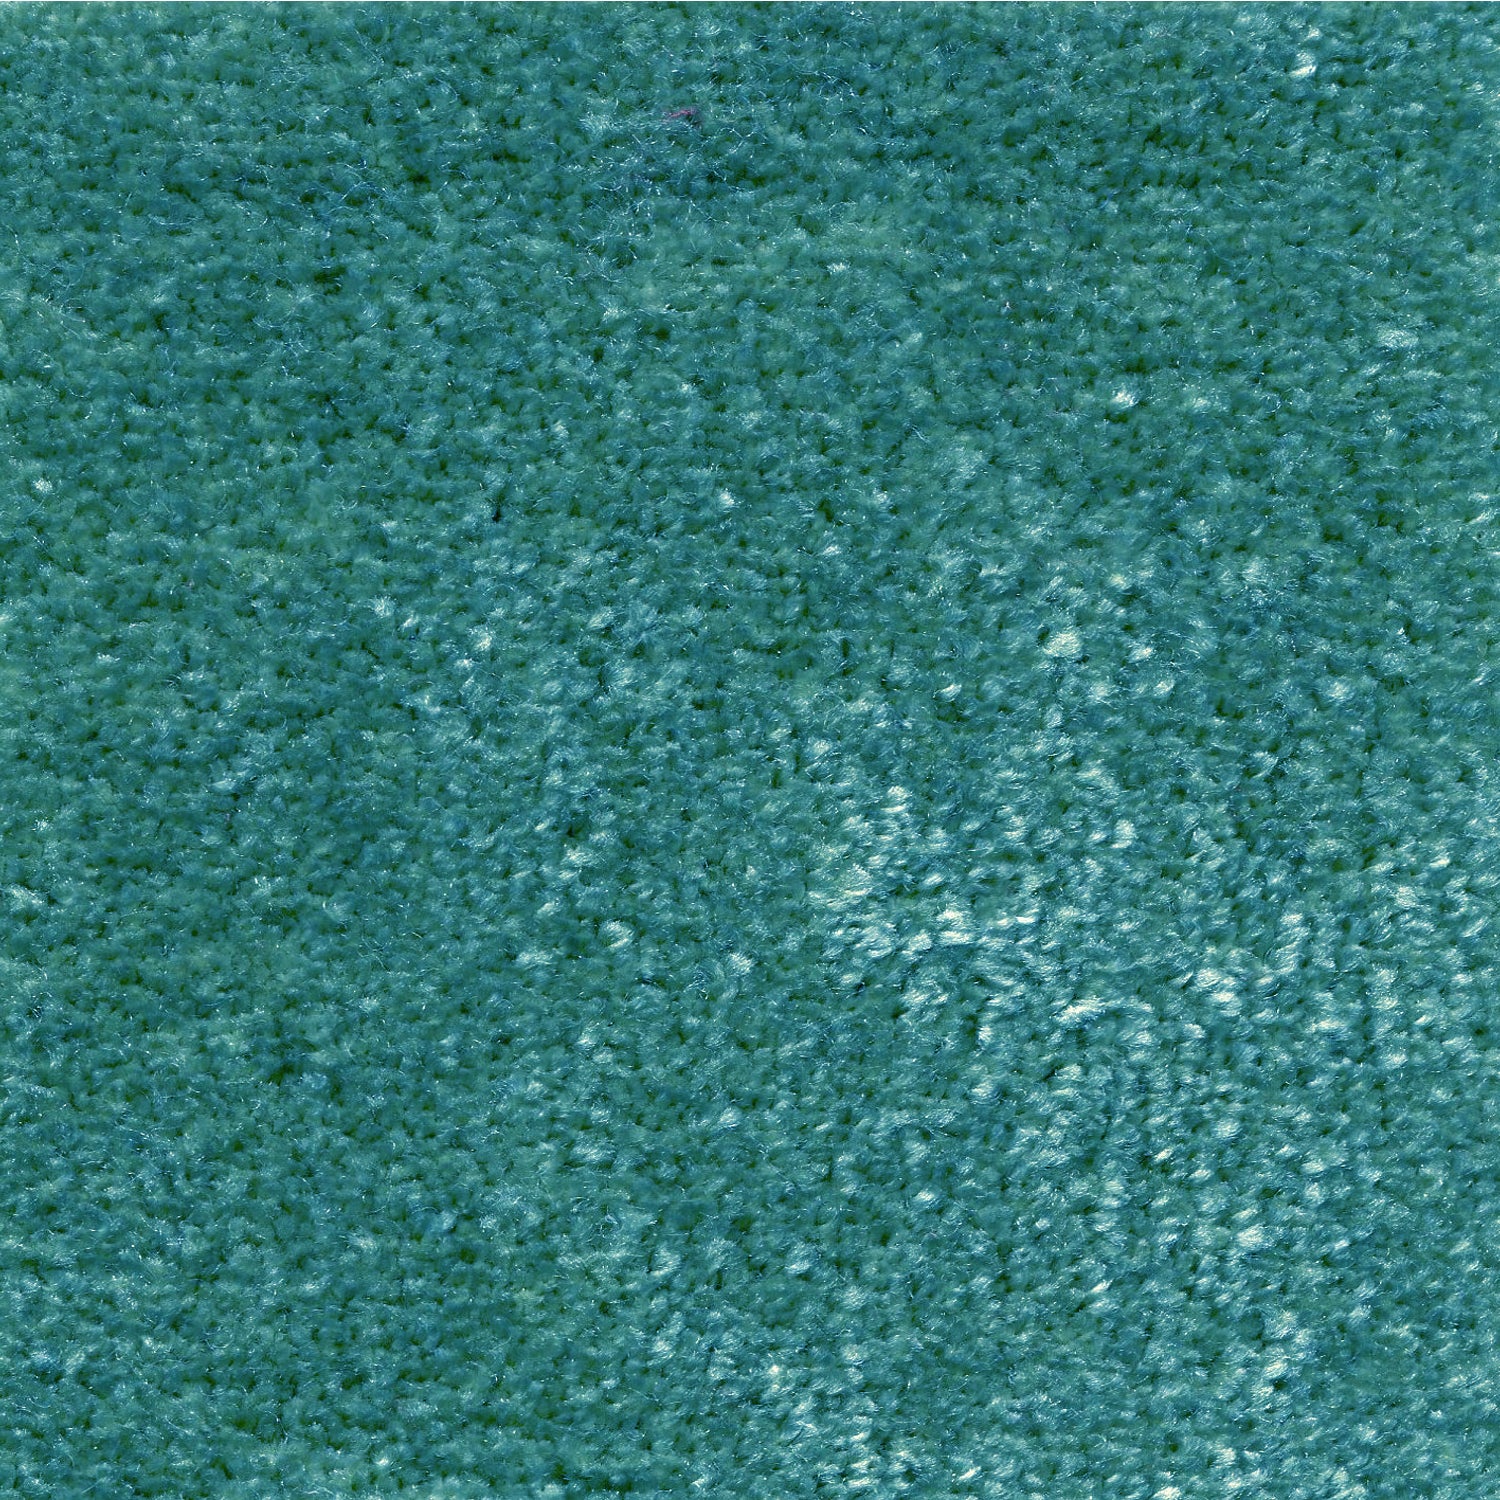 Synthetic blend broadloom carpet swatch in a cut pile texture in turquoise.